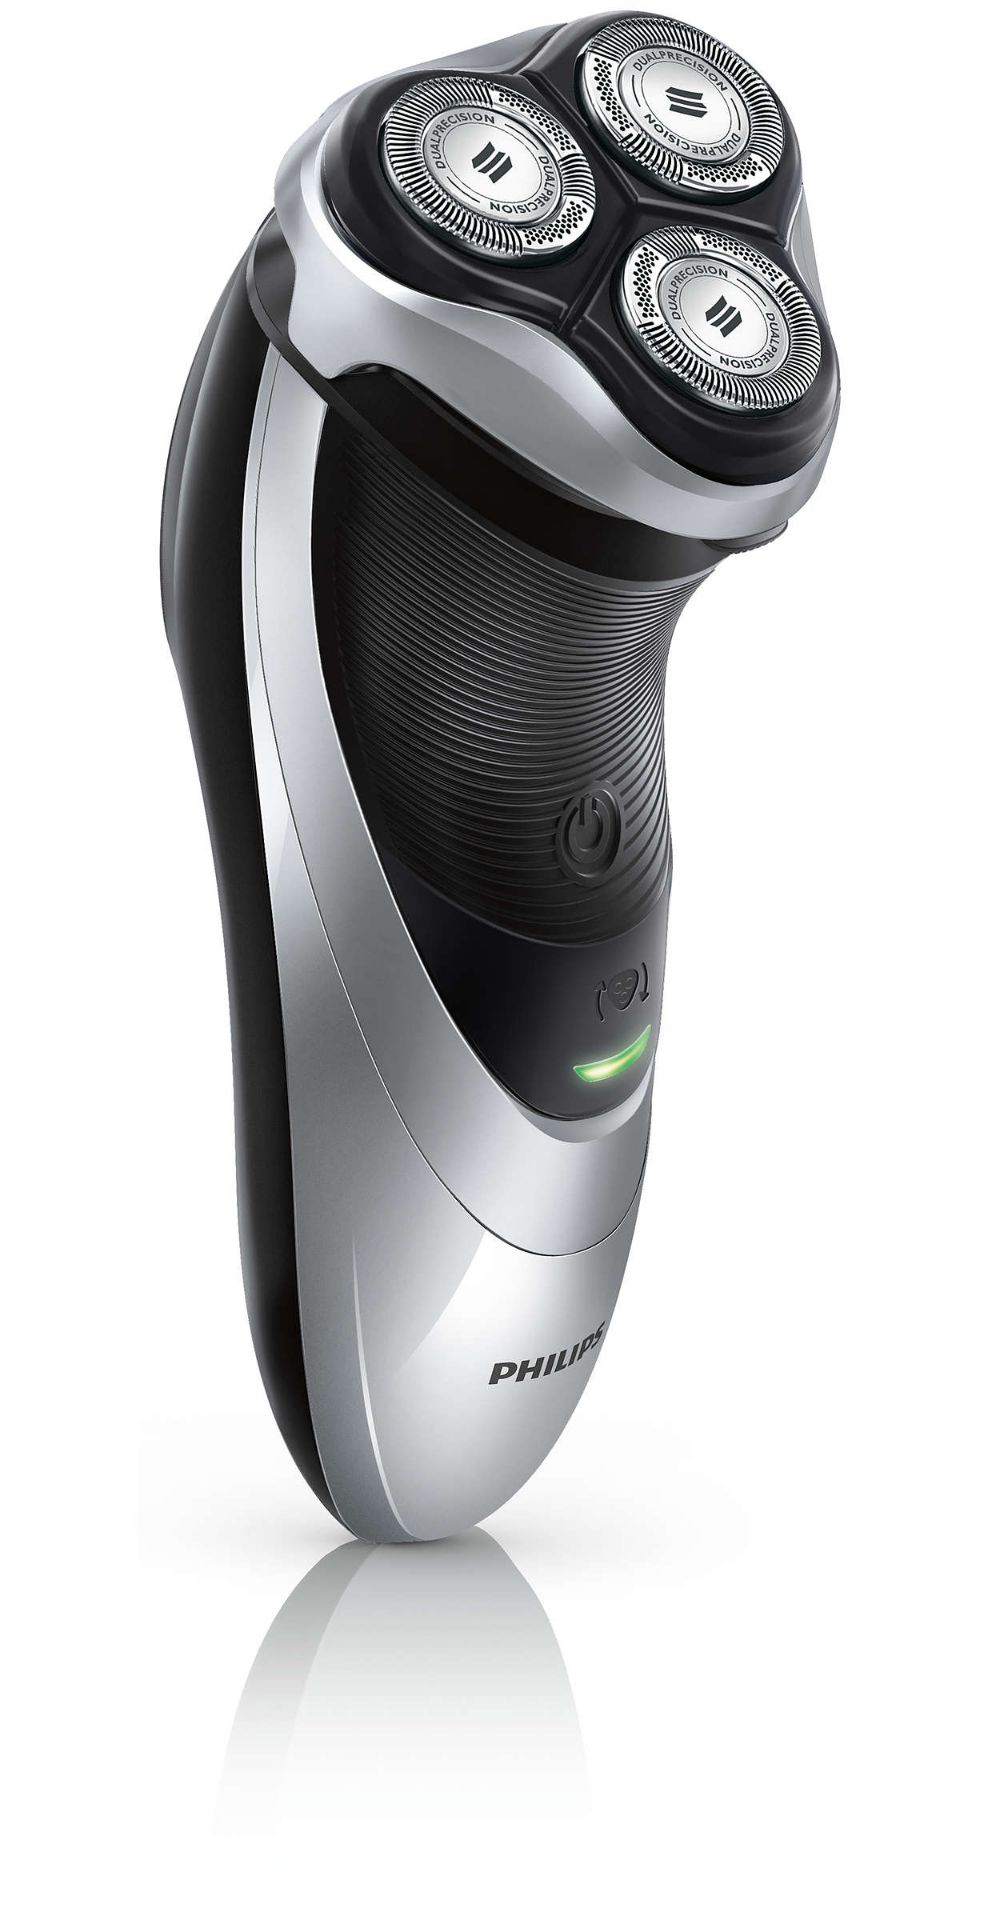 V Brand New Philips Shaver Series 5000 - 3 Head Dual Precision Dry Electric Shaver - Flex and Rotate - Image 2 of 2